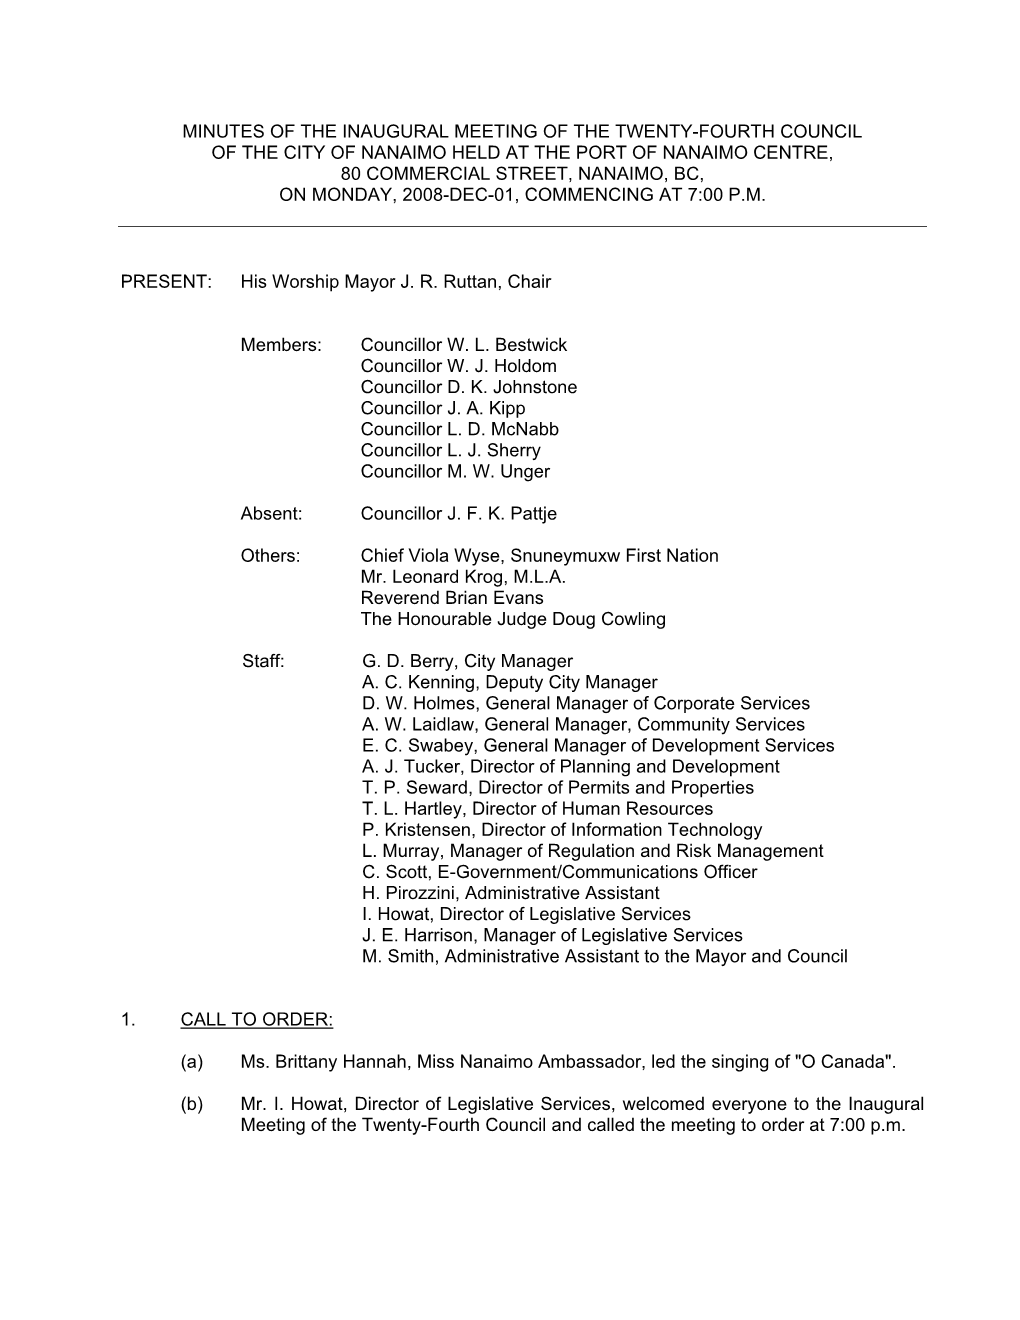 Minutes of the 24Th Inaugural Council Meeting Held December 01, 2008